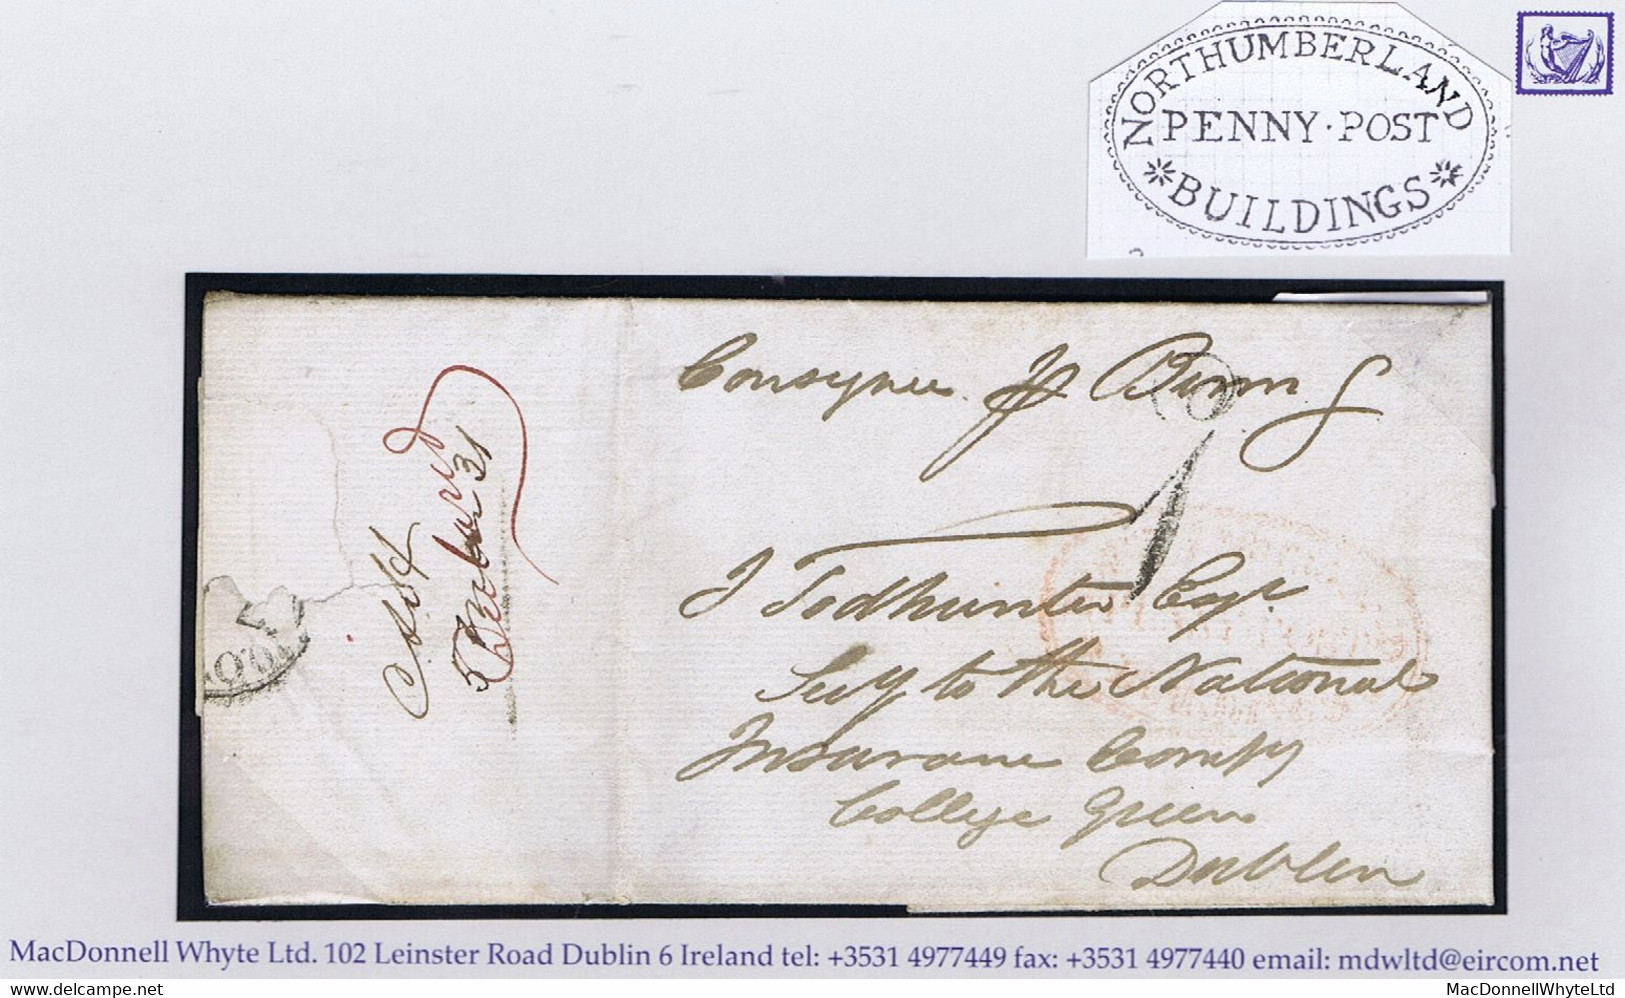 Ireland Maritime Dublin Penny Post 1831 Consignee's Letter Liverpool To Dublin NORTHUMBERLAND BUILDINGS PENNY POST - Vorphilatelie